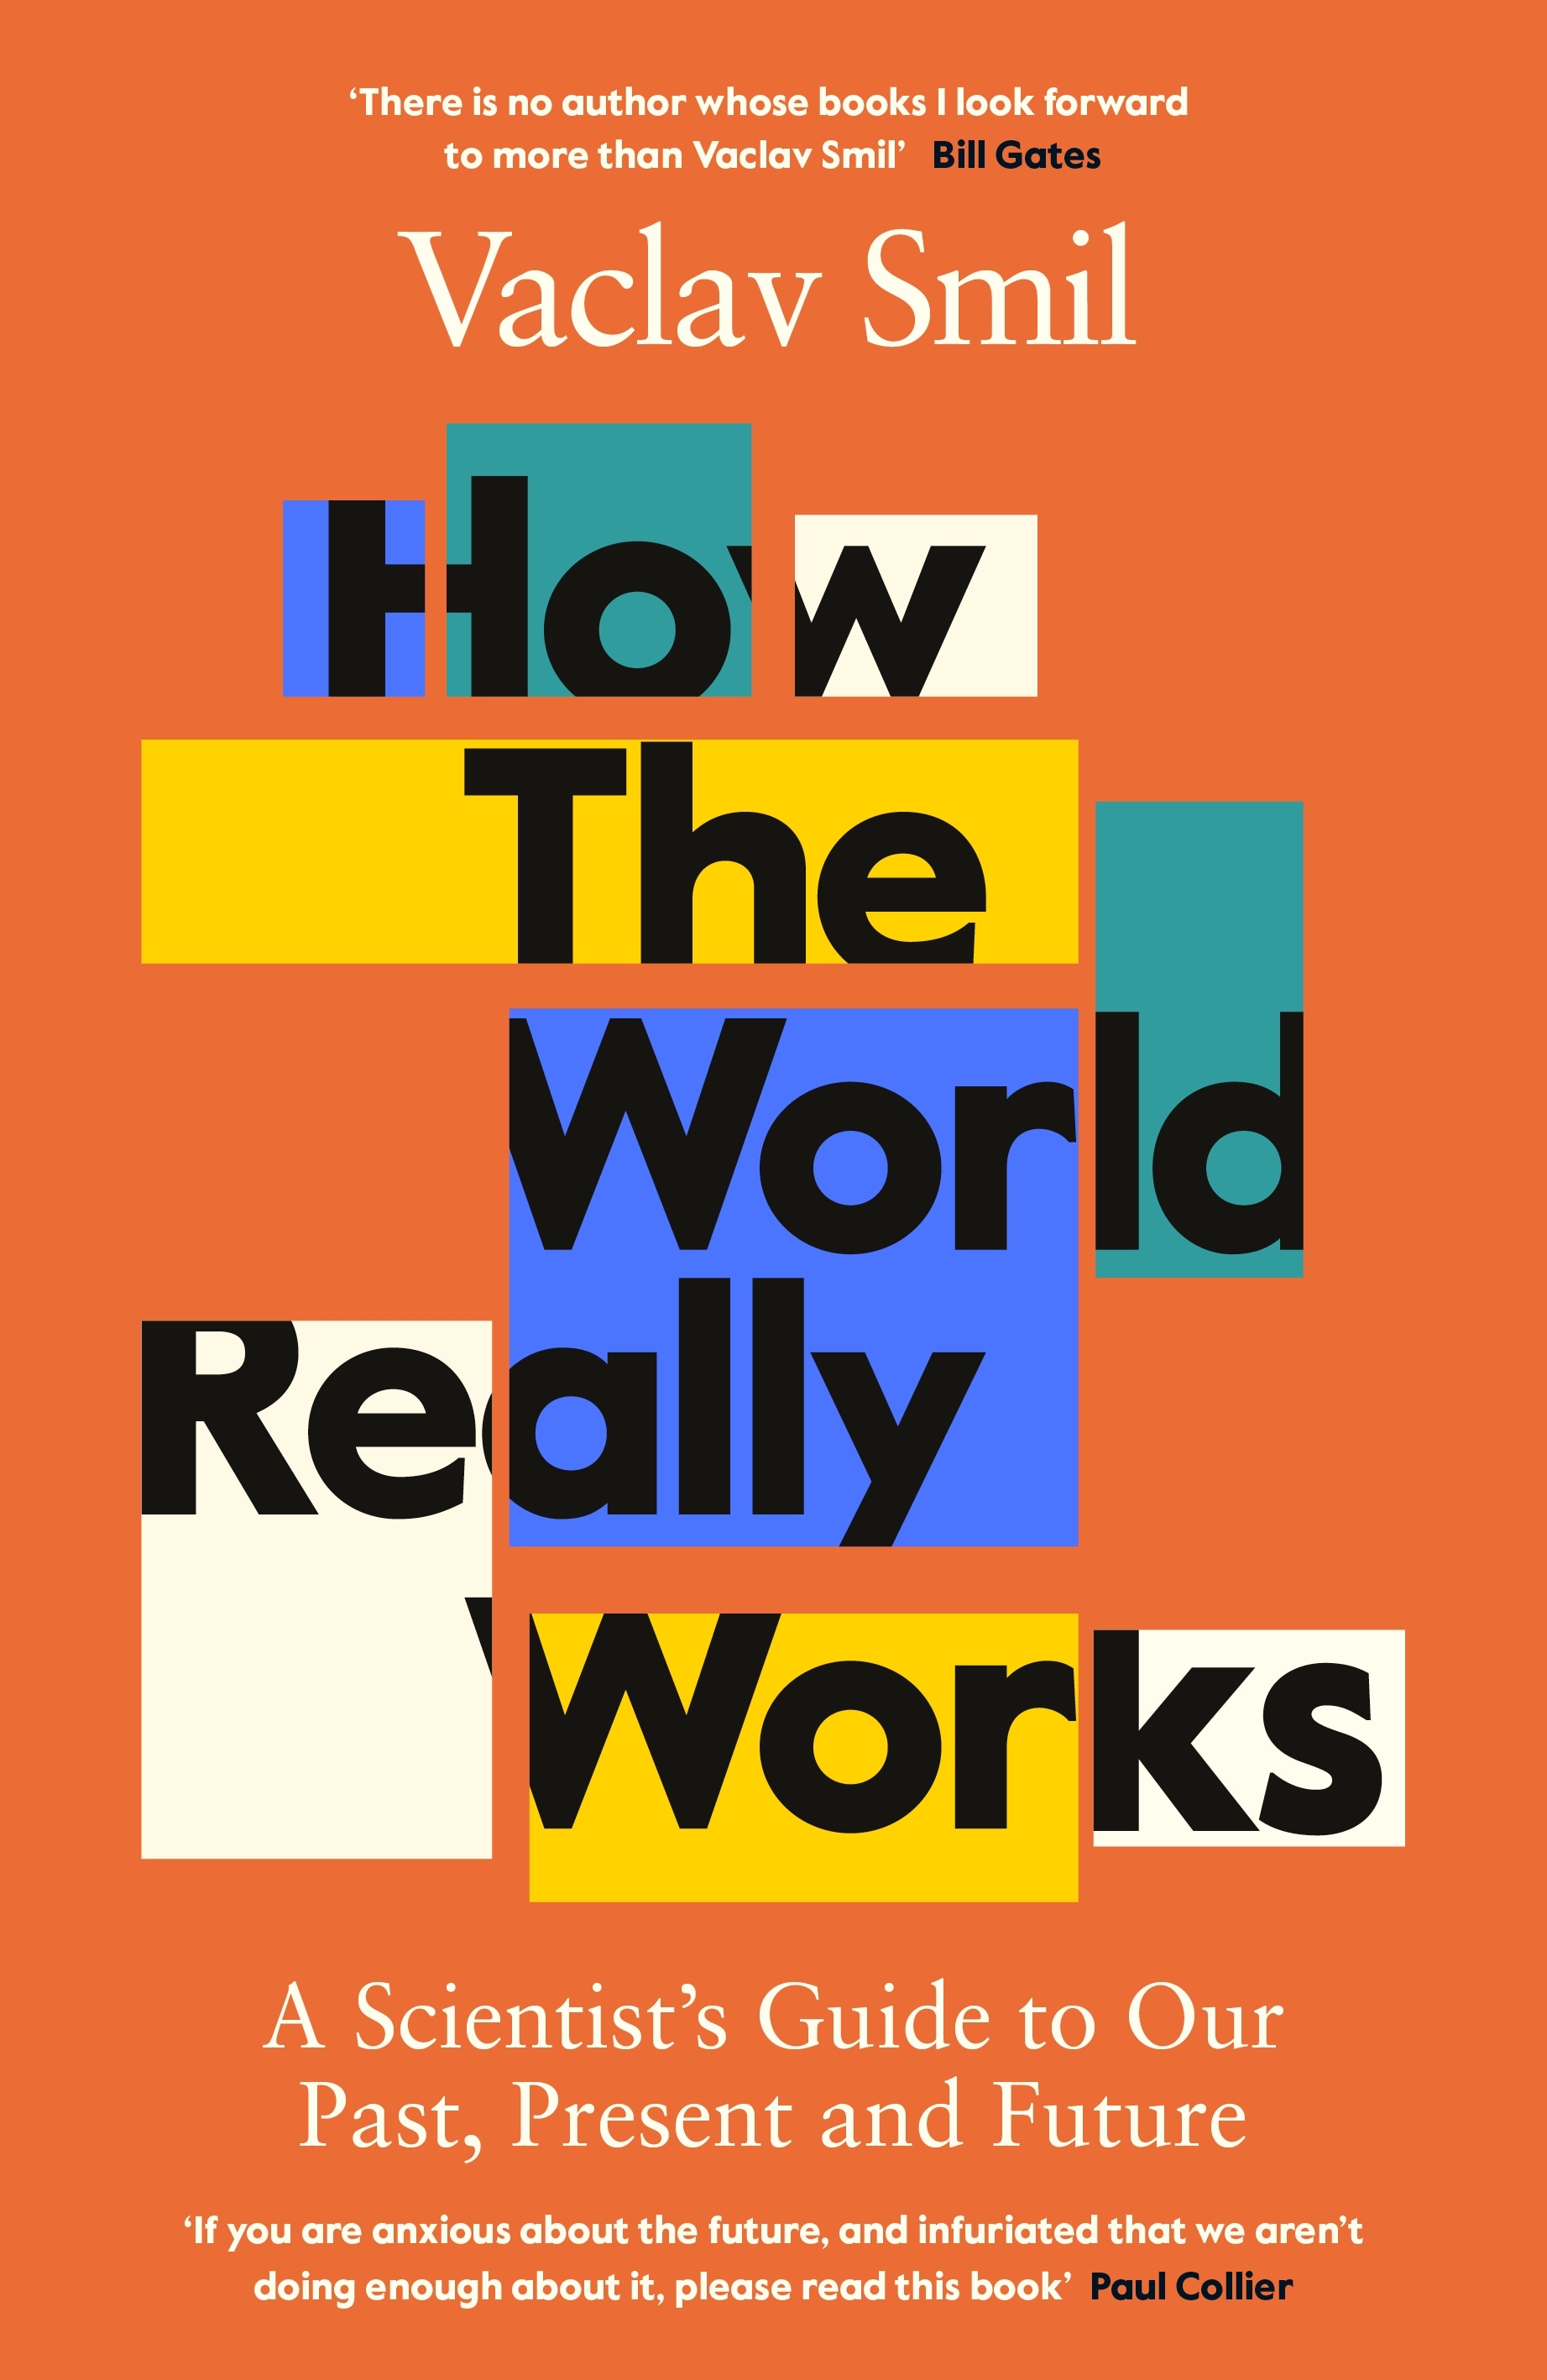 Book “How the World Really Works” by Vaclav Smil — January 27, 2022